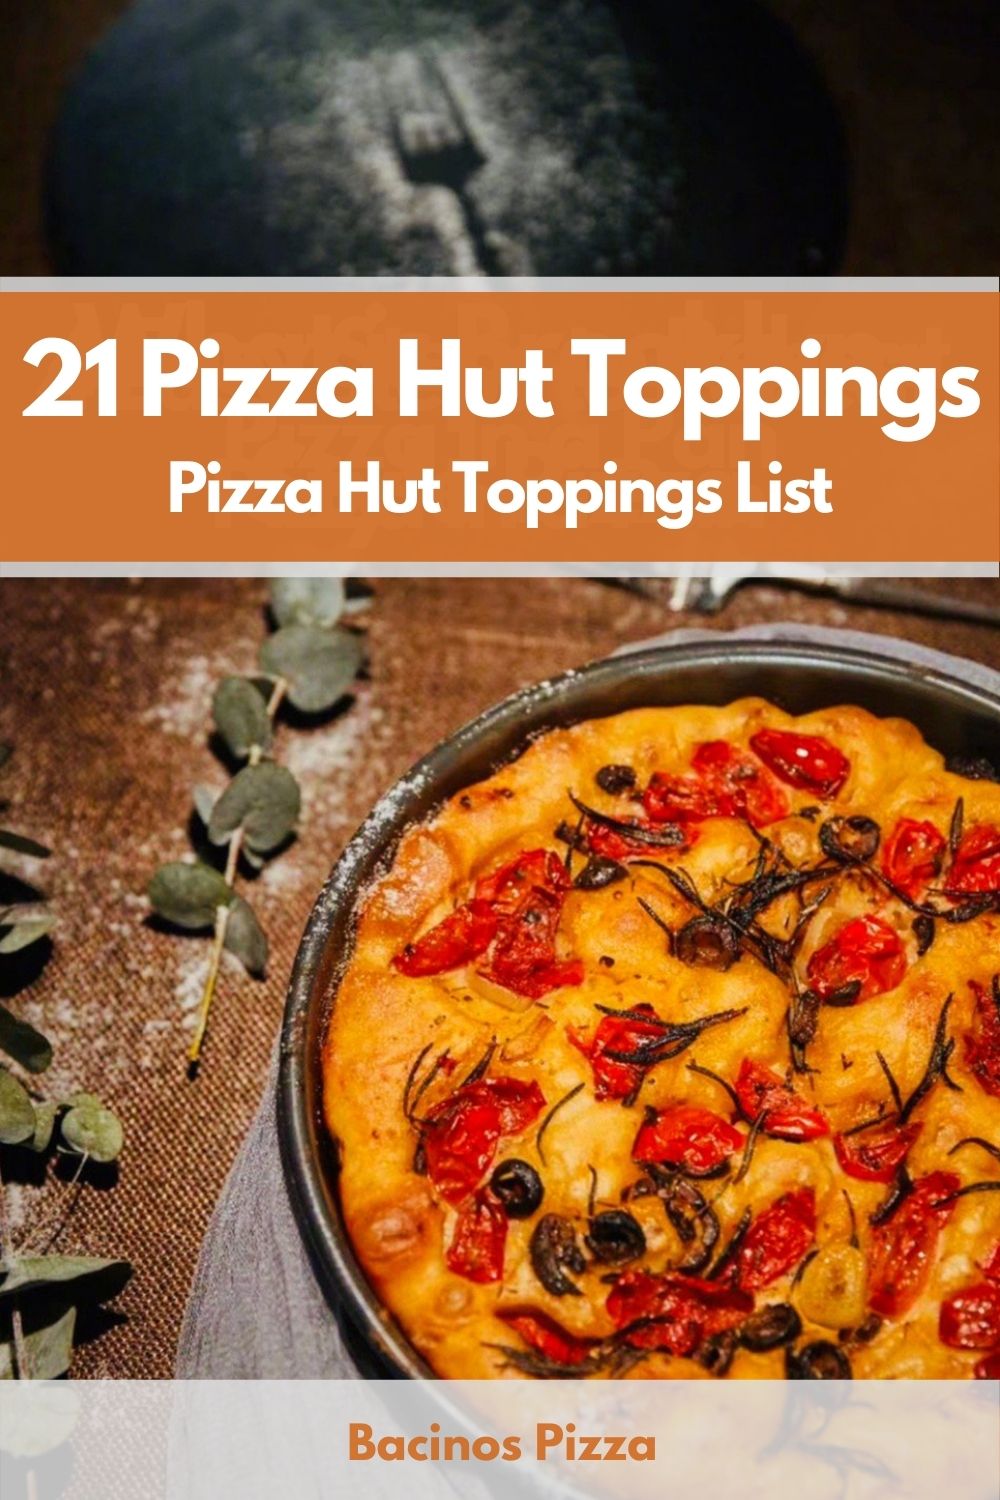 21 Pizza Hut Toppings - Pizza Hut Toppings List pin 2